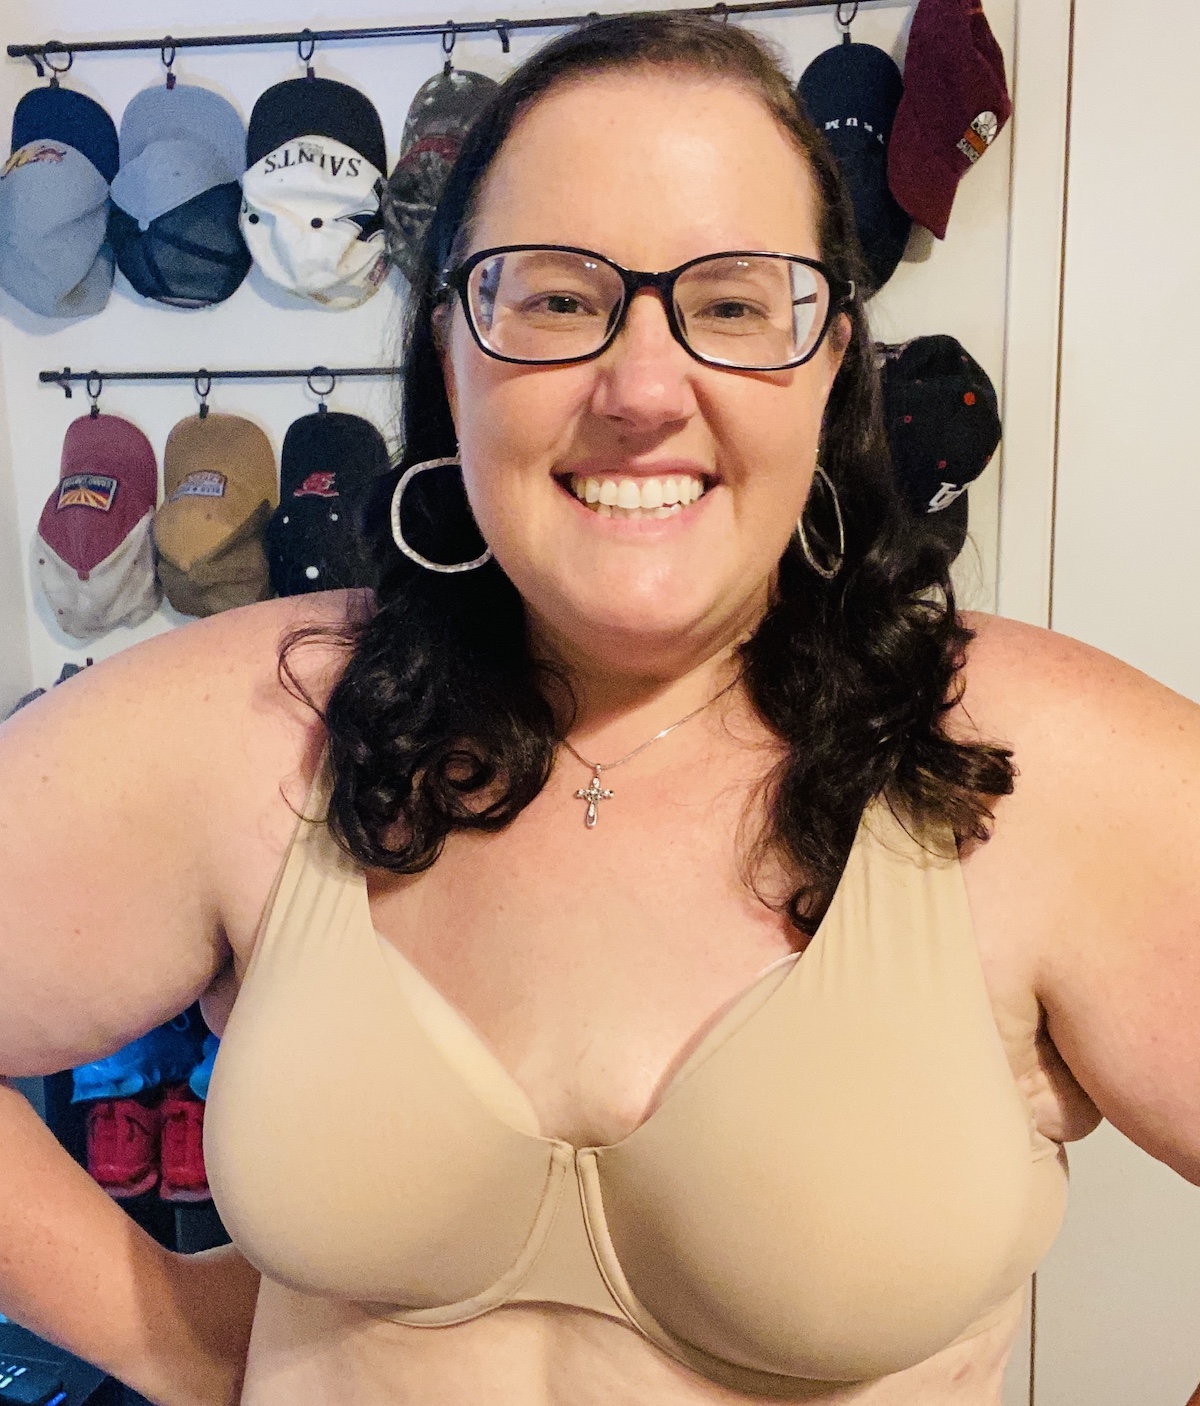 Lane Bryant - Does your bra make you happy? $15 off says ours will